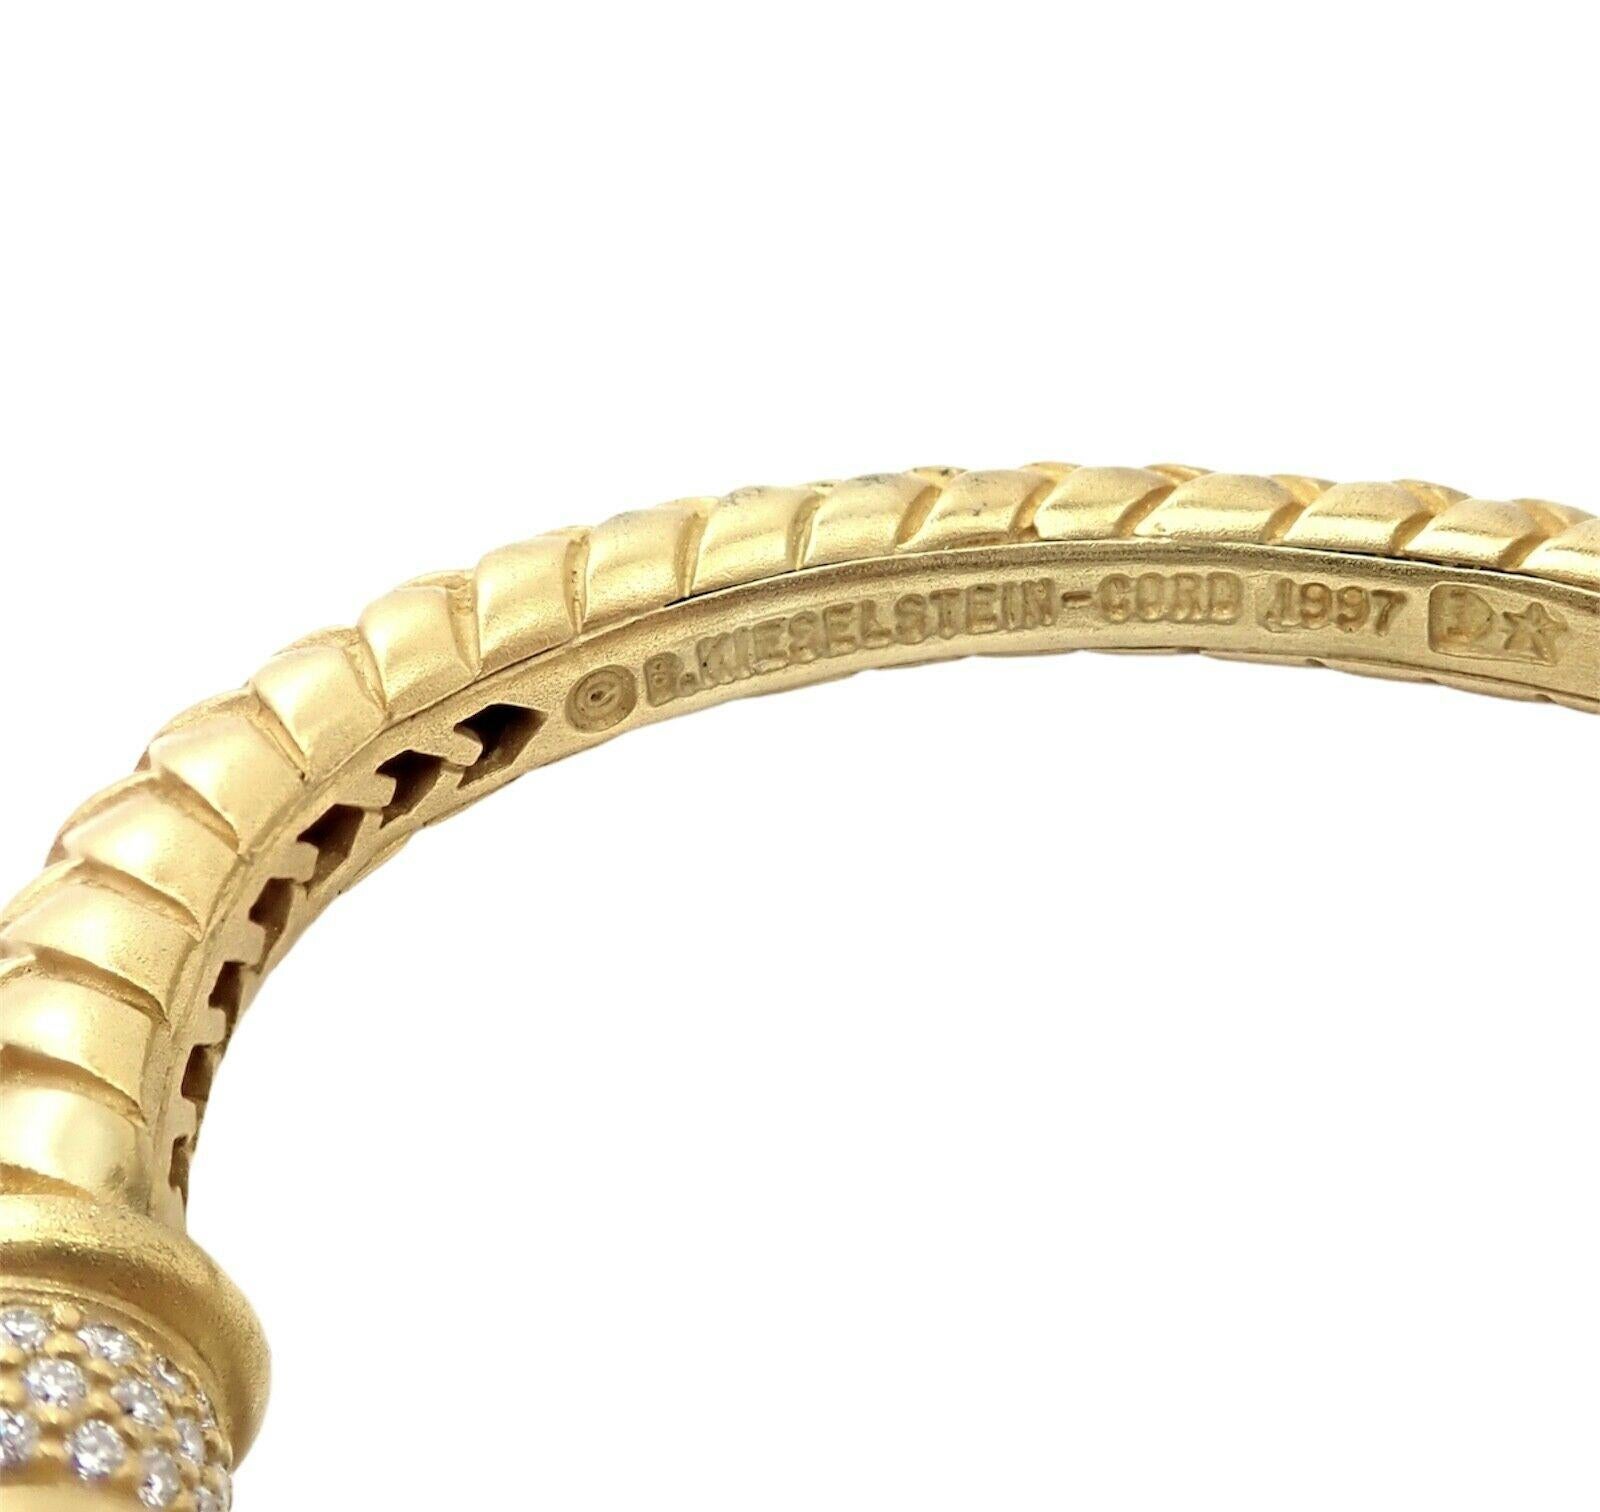 Kieselstein Cord Diamond Two Alligator Heads Yellow Gold Bangle Bracelet In Excellent Condition For Sale In Holland, PA